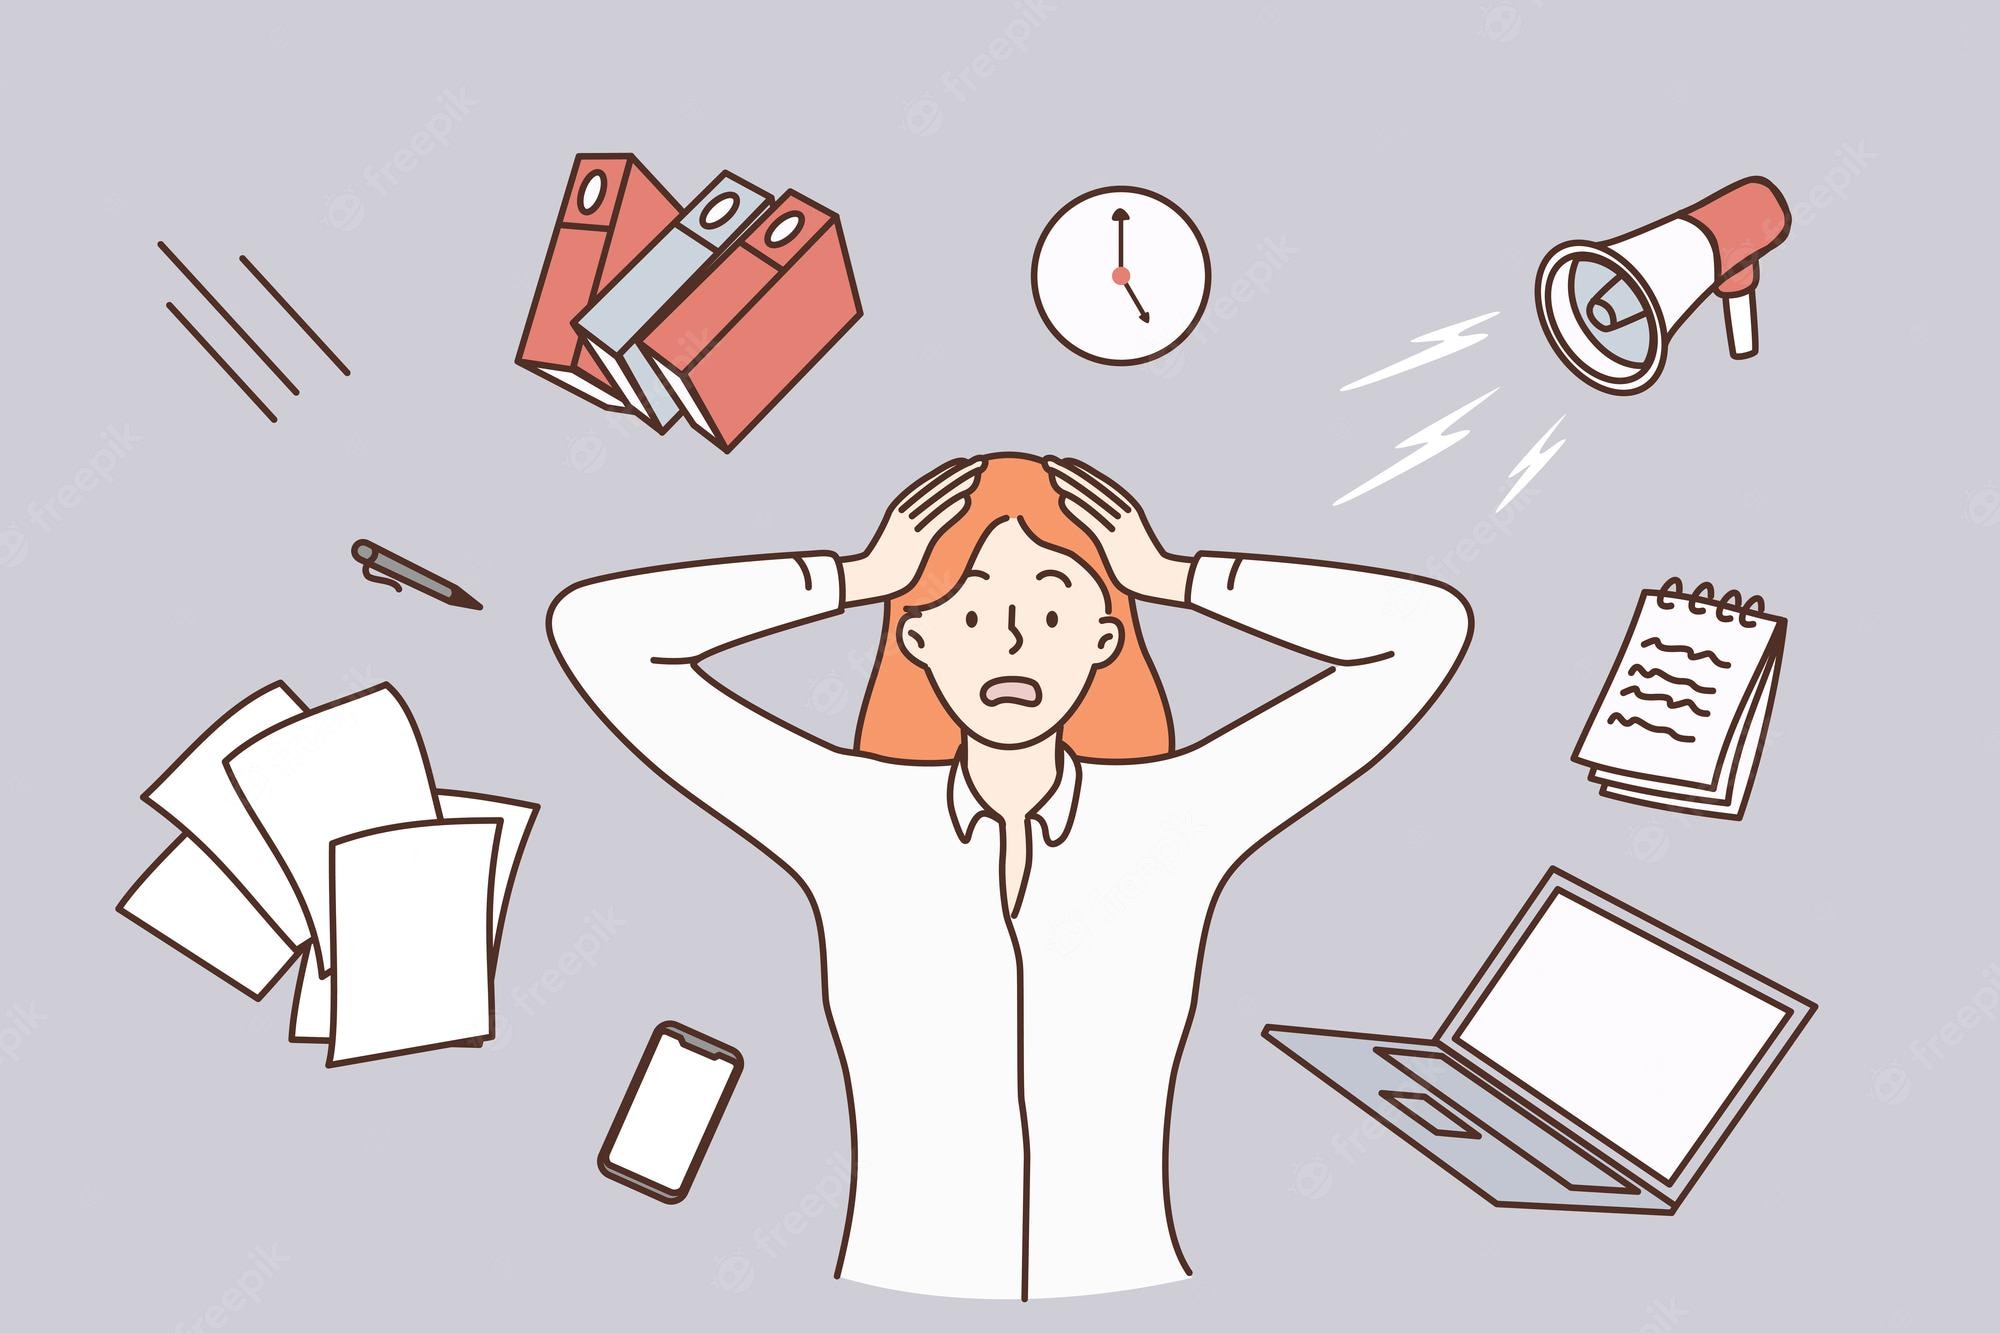 Tips on preventing becoming overwhelmed in work?